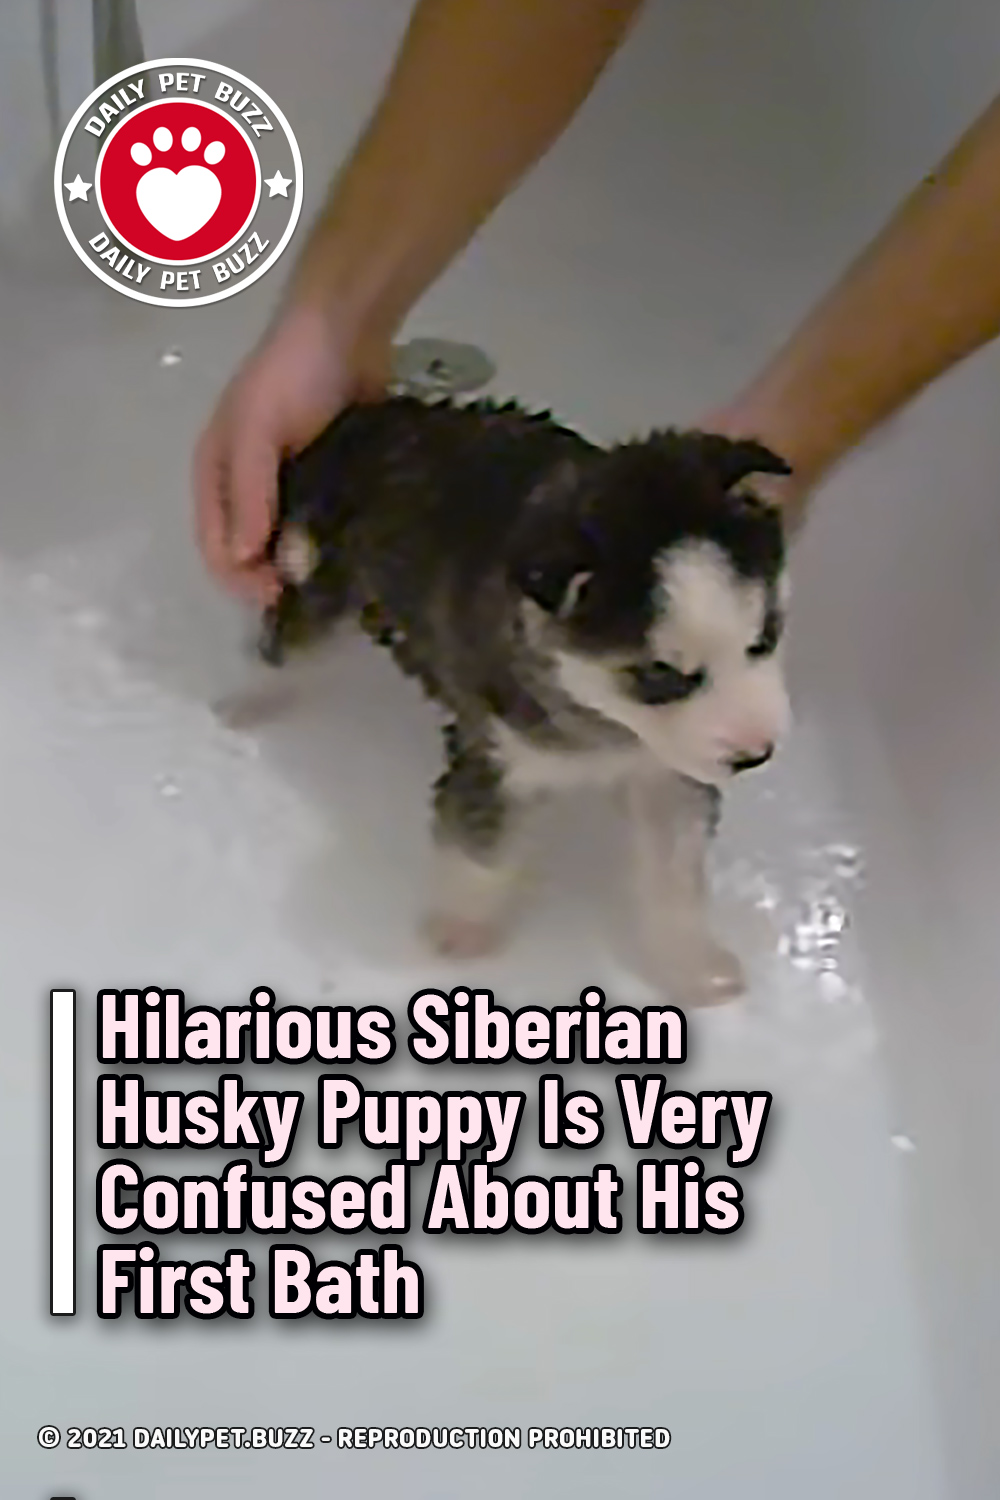 Hilarious Siberian Husky Puppy Is Very Confused About His First Bath